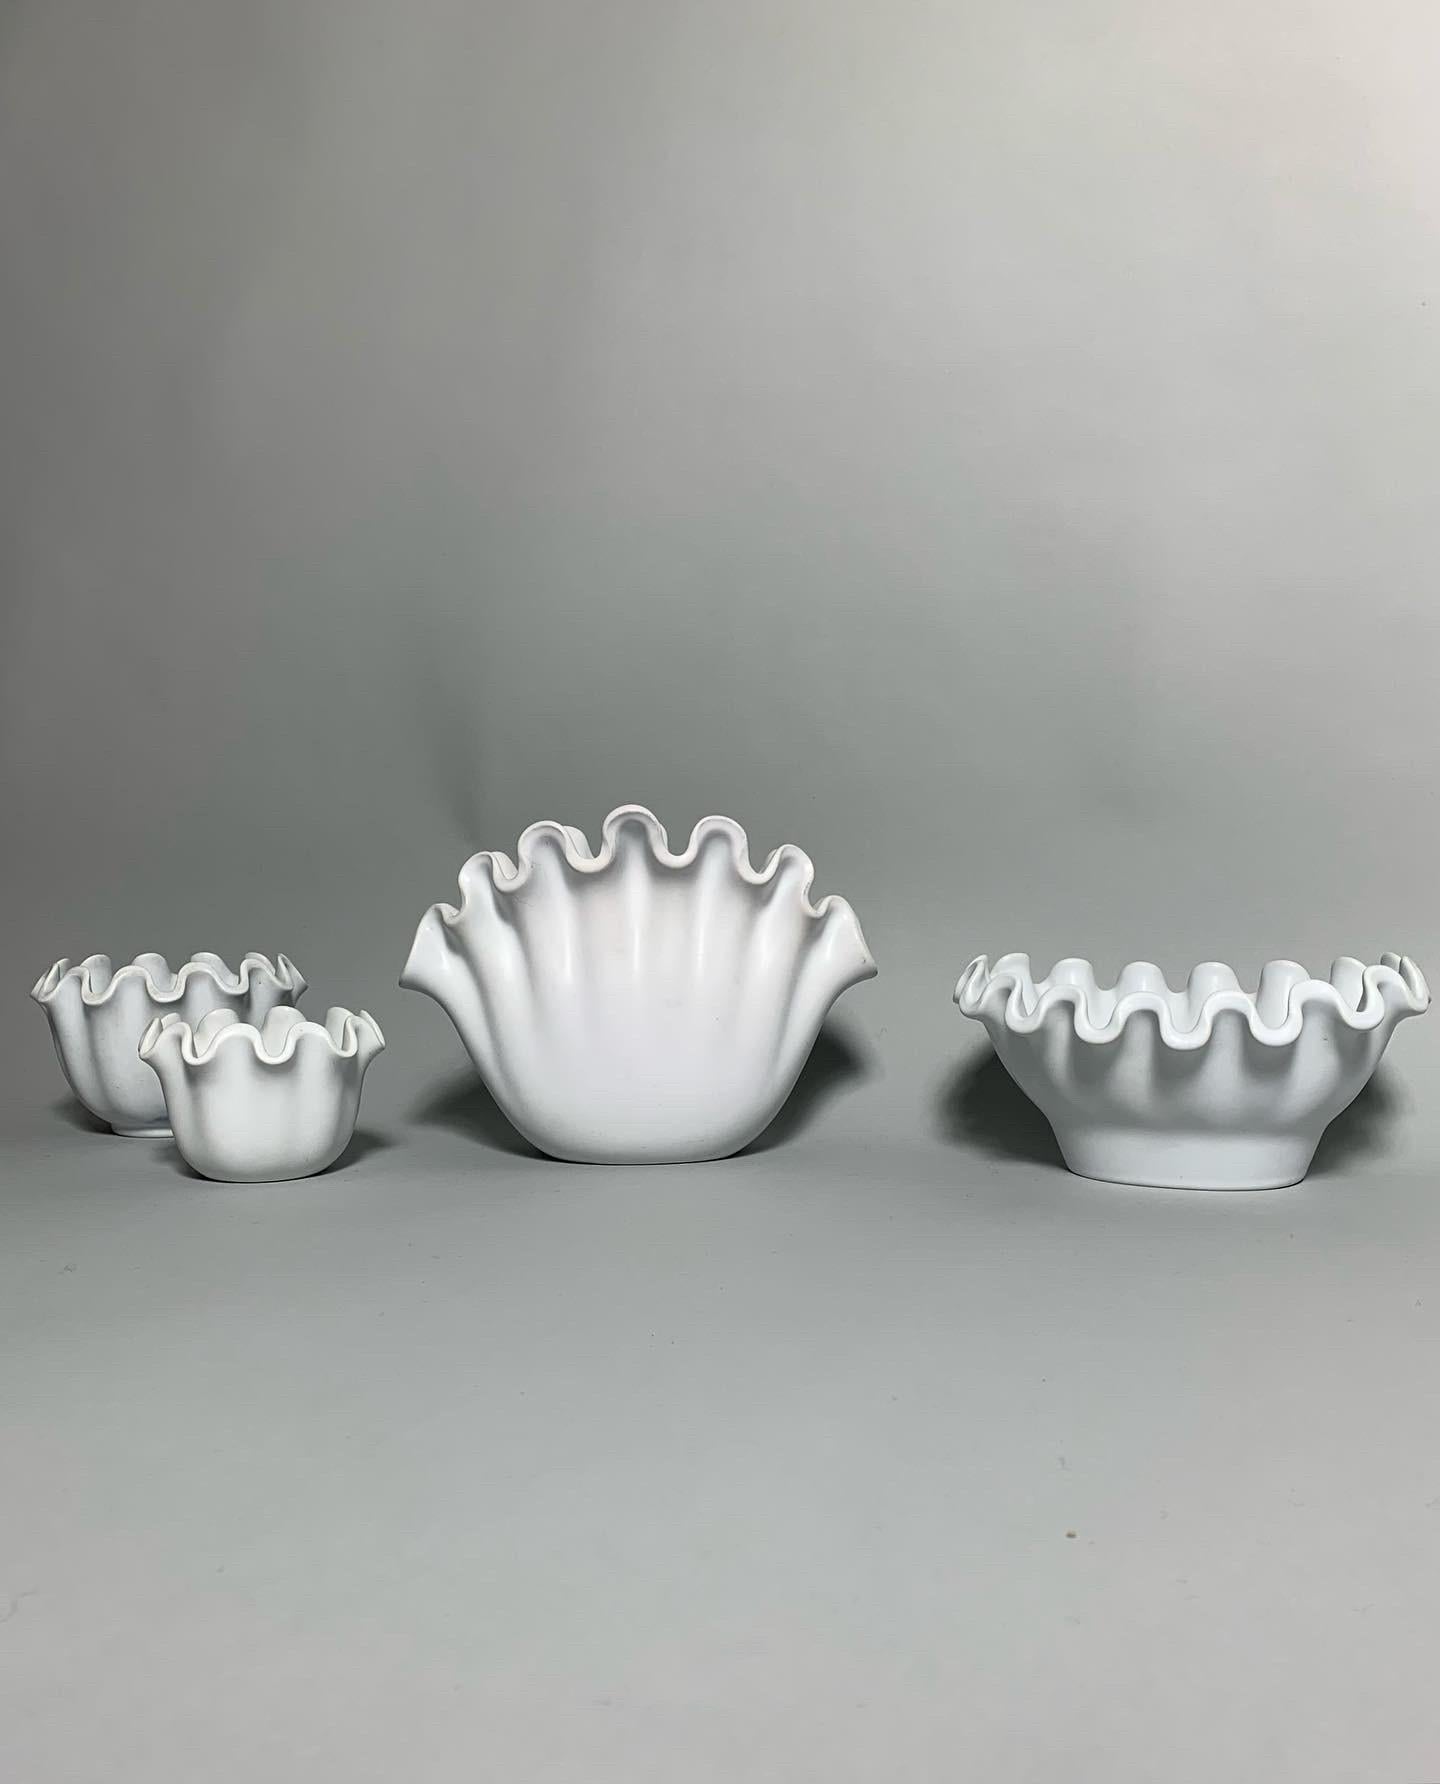 Rare set of Wilhelm Ka°ge ‚Va°ga’ (wave) bowls for the renowned Swedish ceramic manufacturer Gustavsberg in the 1950s.

Hand-crafted of white glazed stoneware. All pieces marked on bottom.

From left to right. Listed price is for the whole